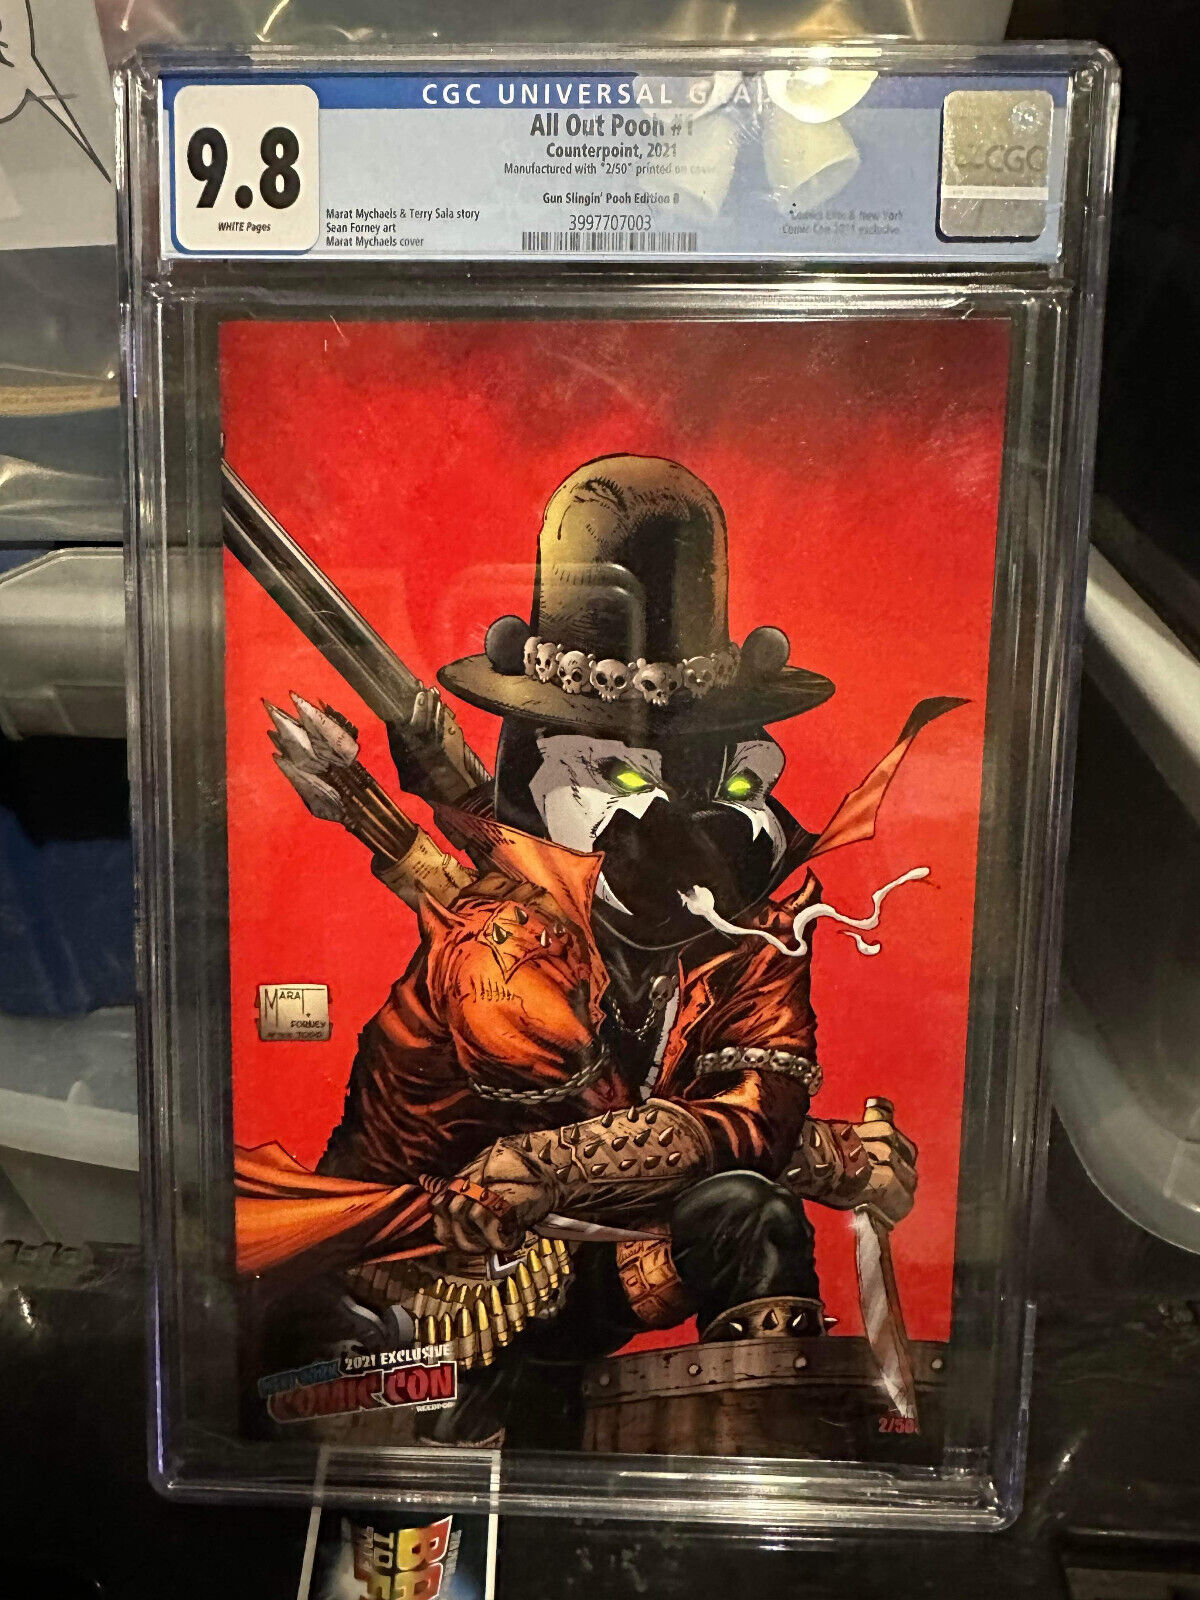 All Out Pooh #1 CGC 9.8 Spawn Gunslinger Homage by Marat Mychaels 2021 NYCC 2/50